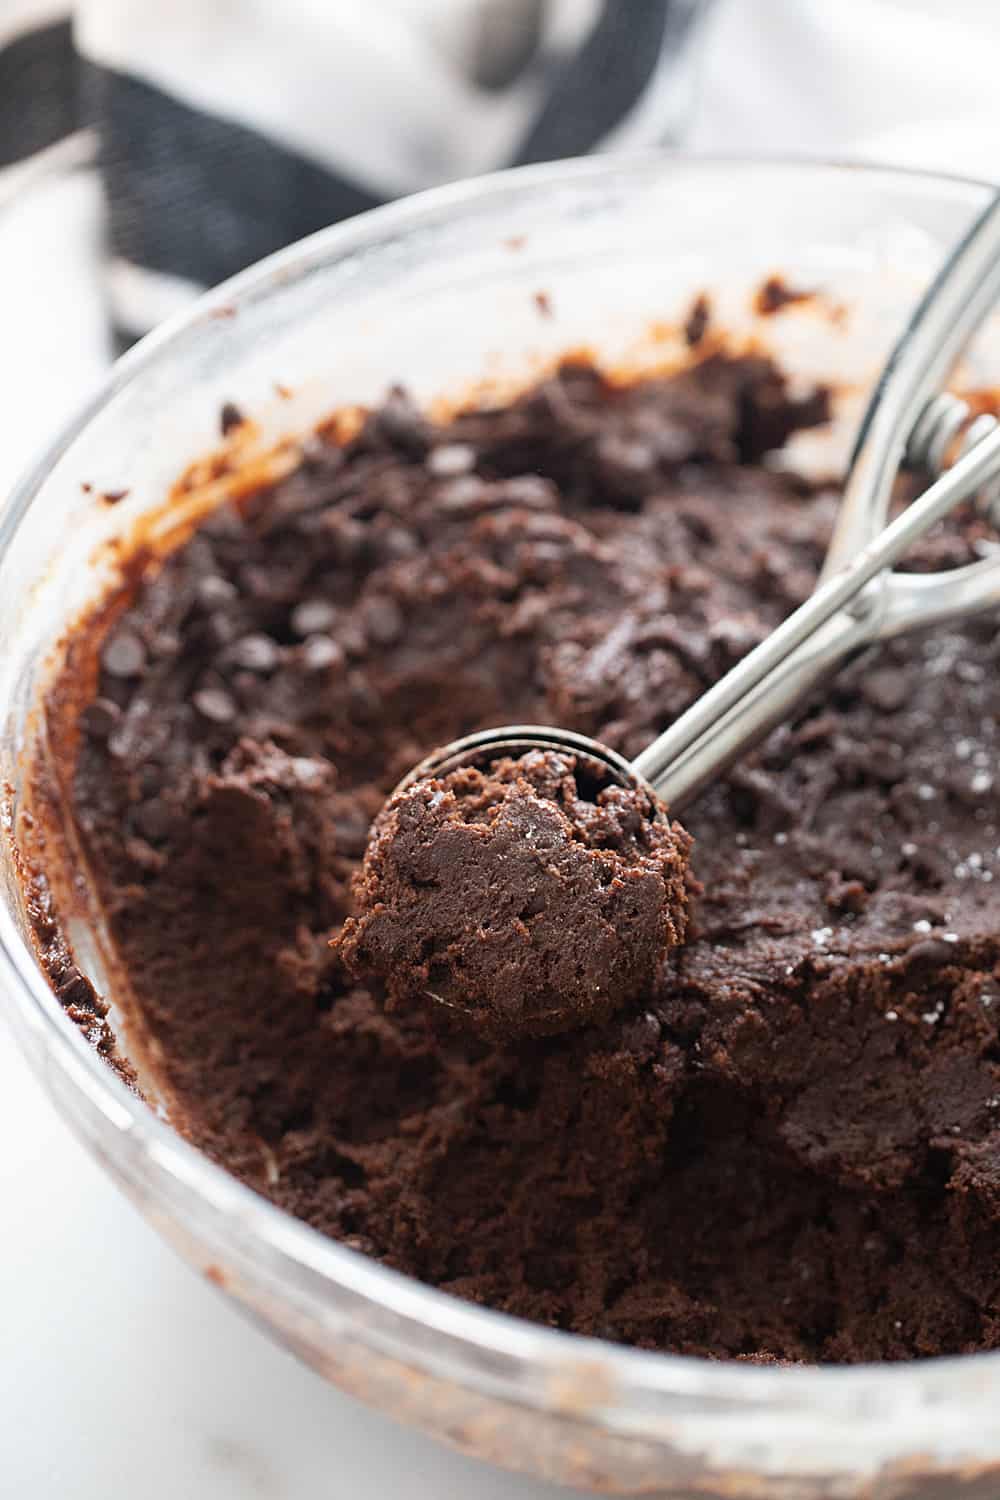 A cookie scoop has Decadent Double Chocolate Crinkle Cookie batter in it ready to place on pan for baking